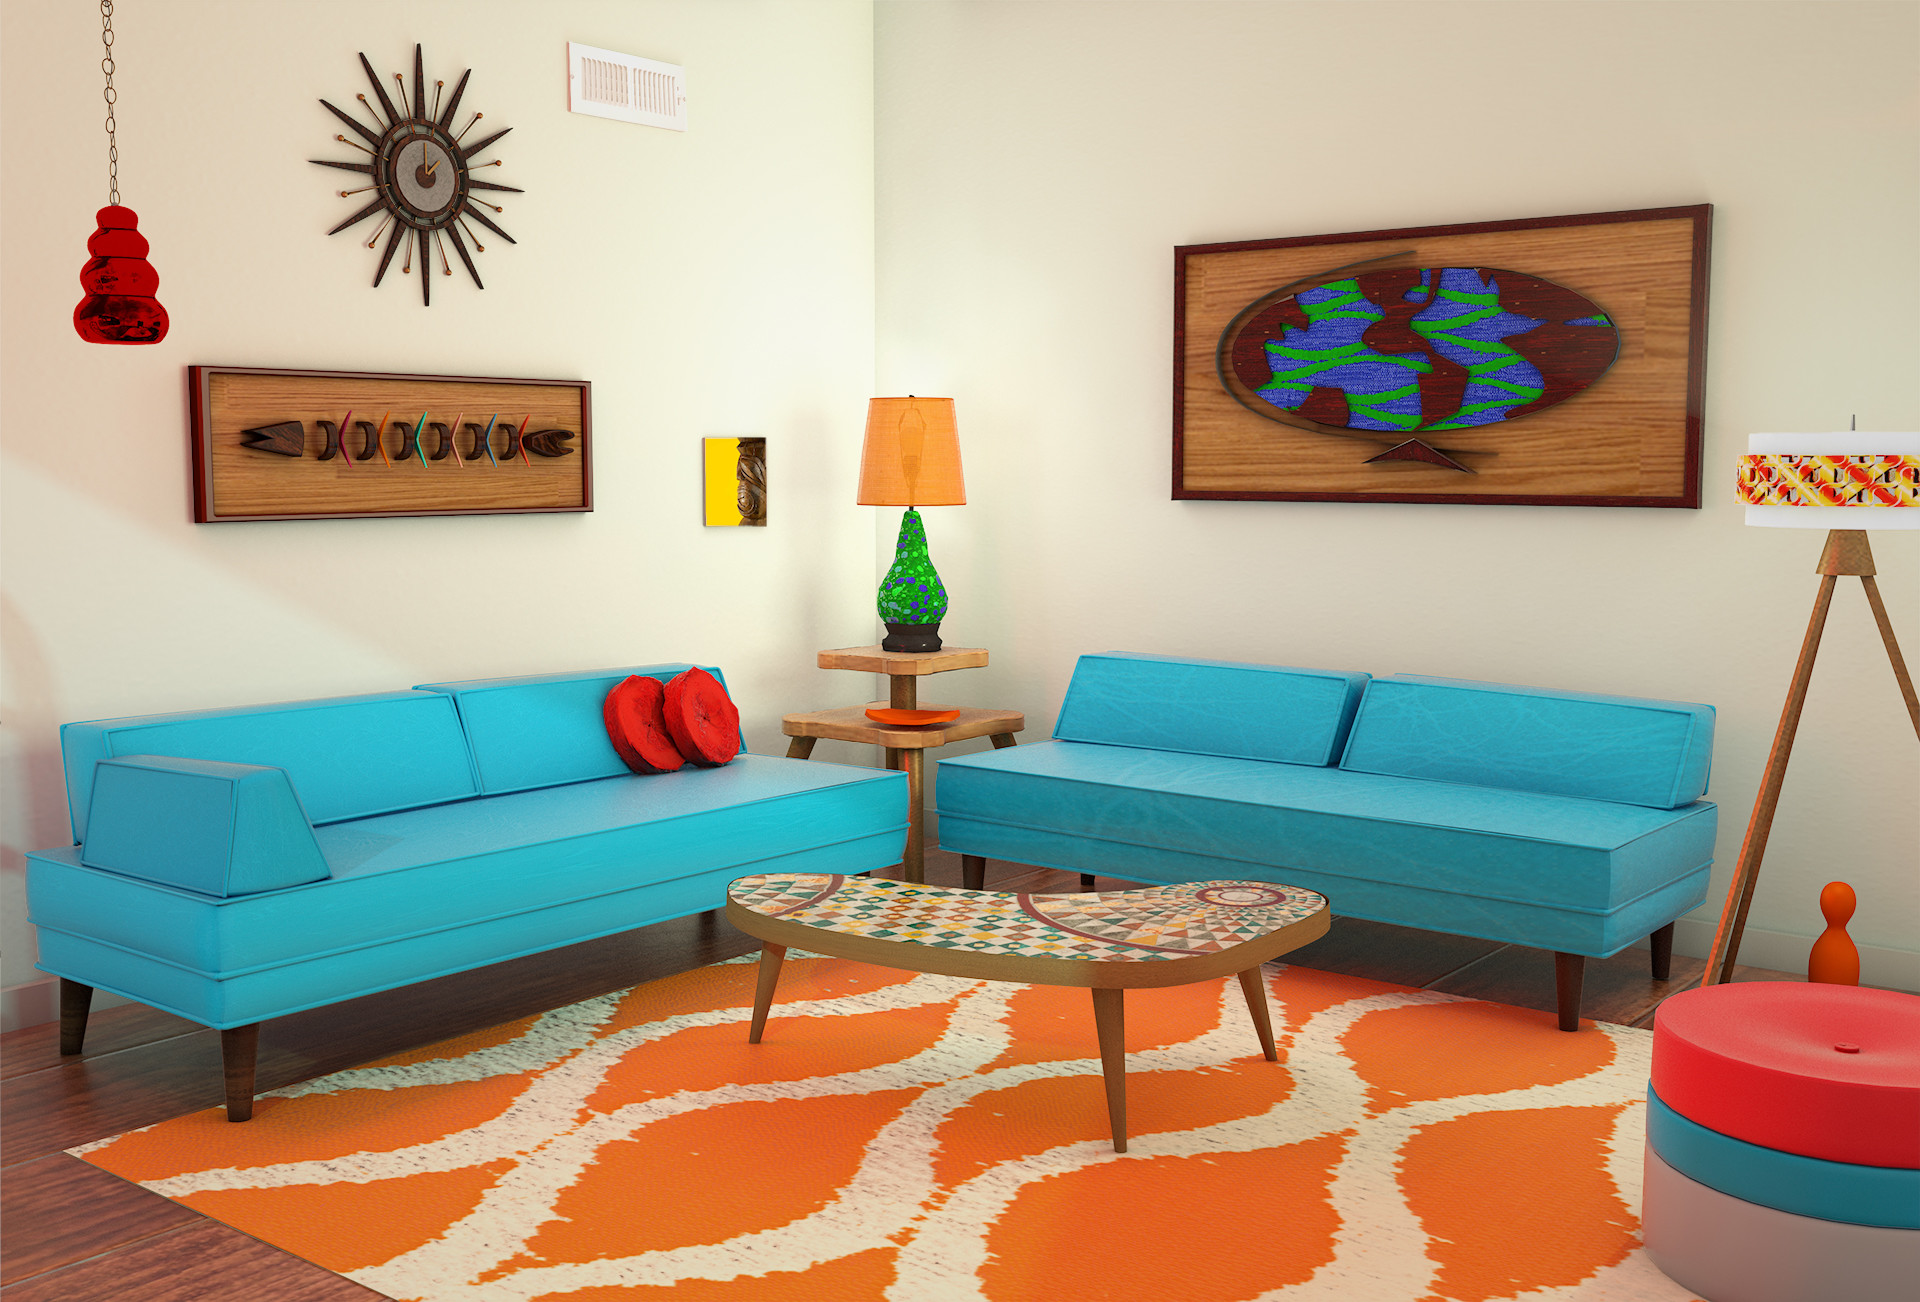 That 70s Show Living Room Looks Like